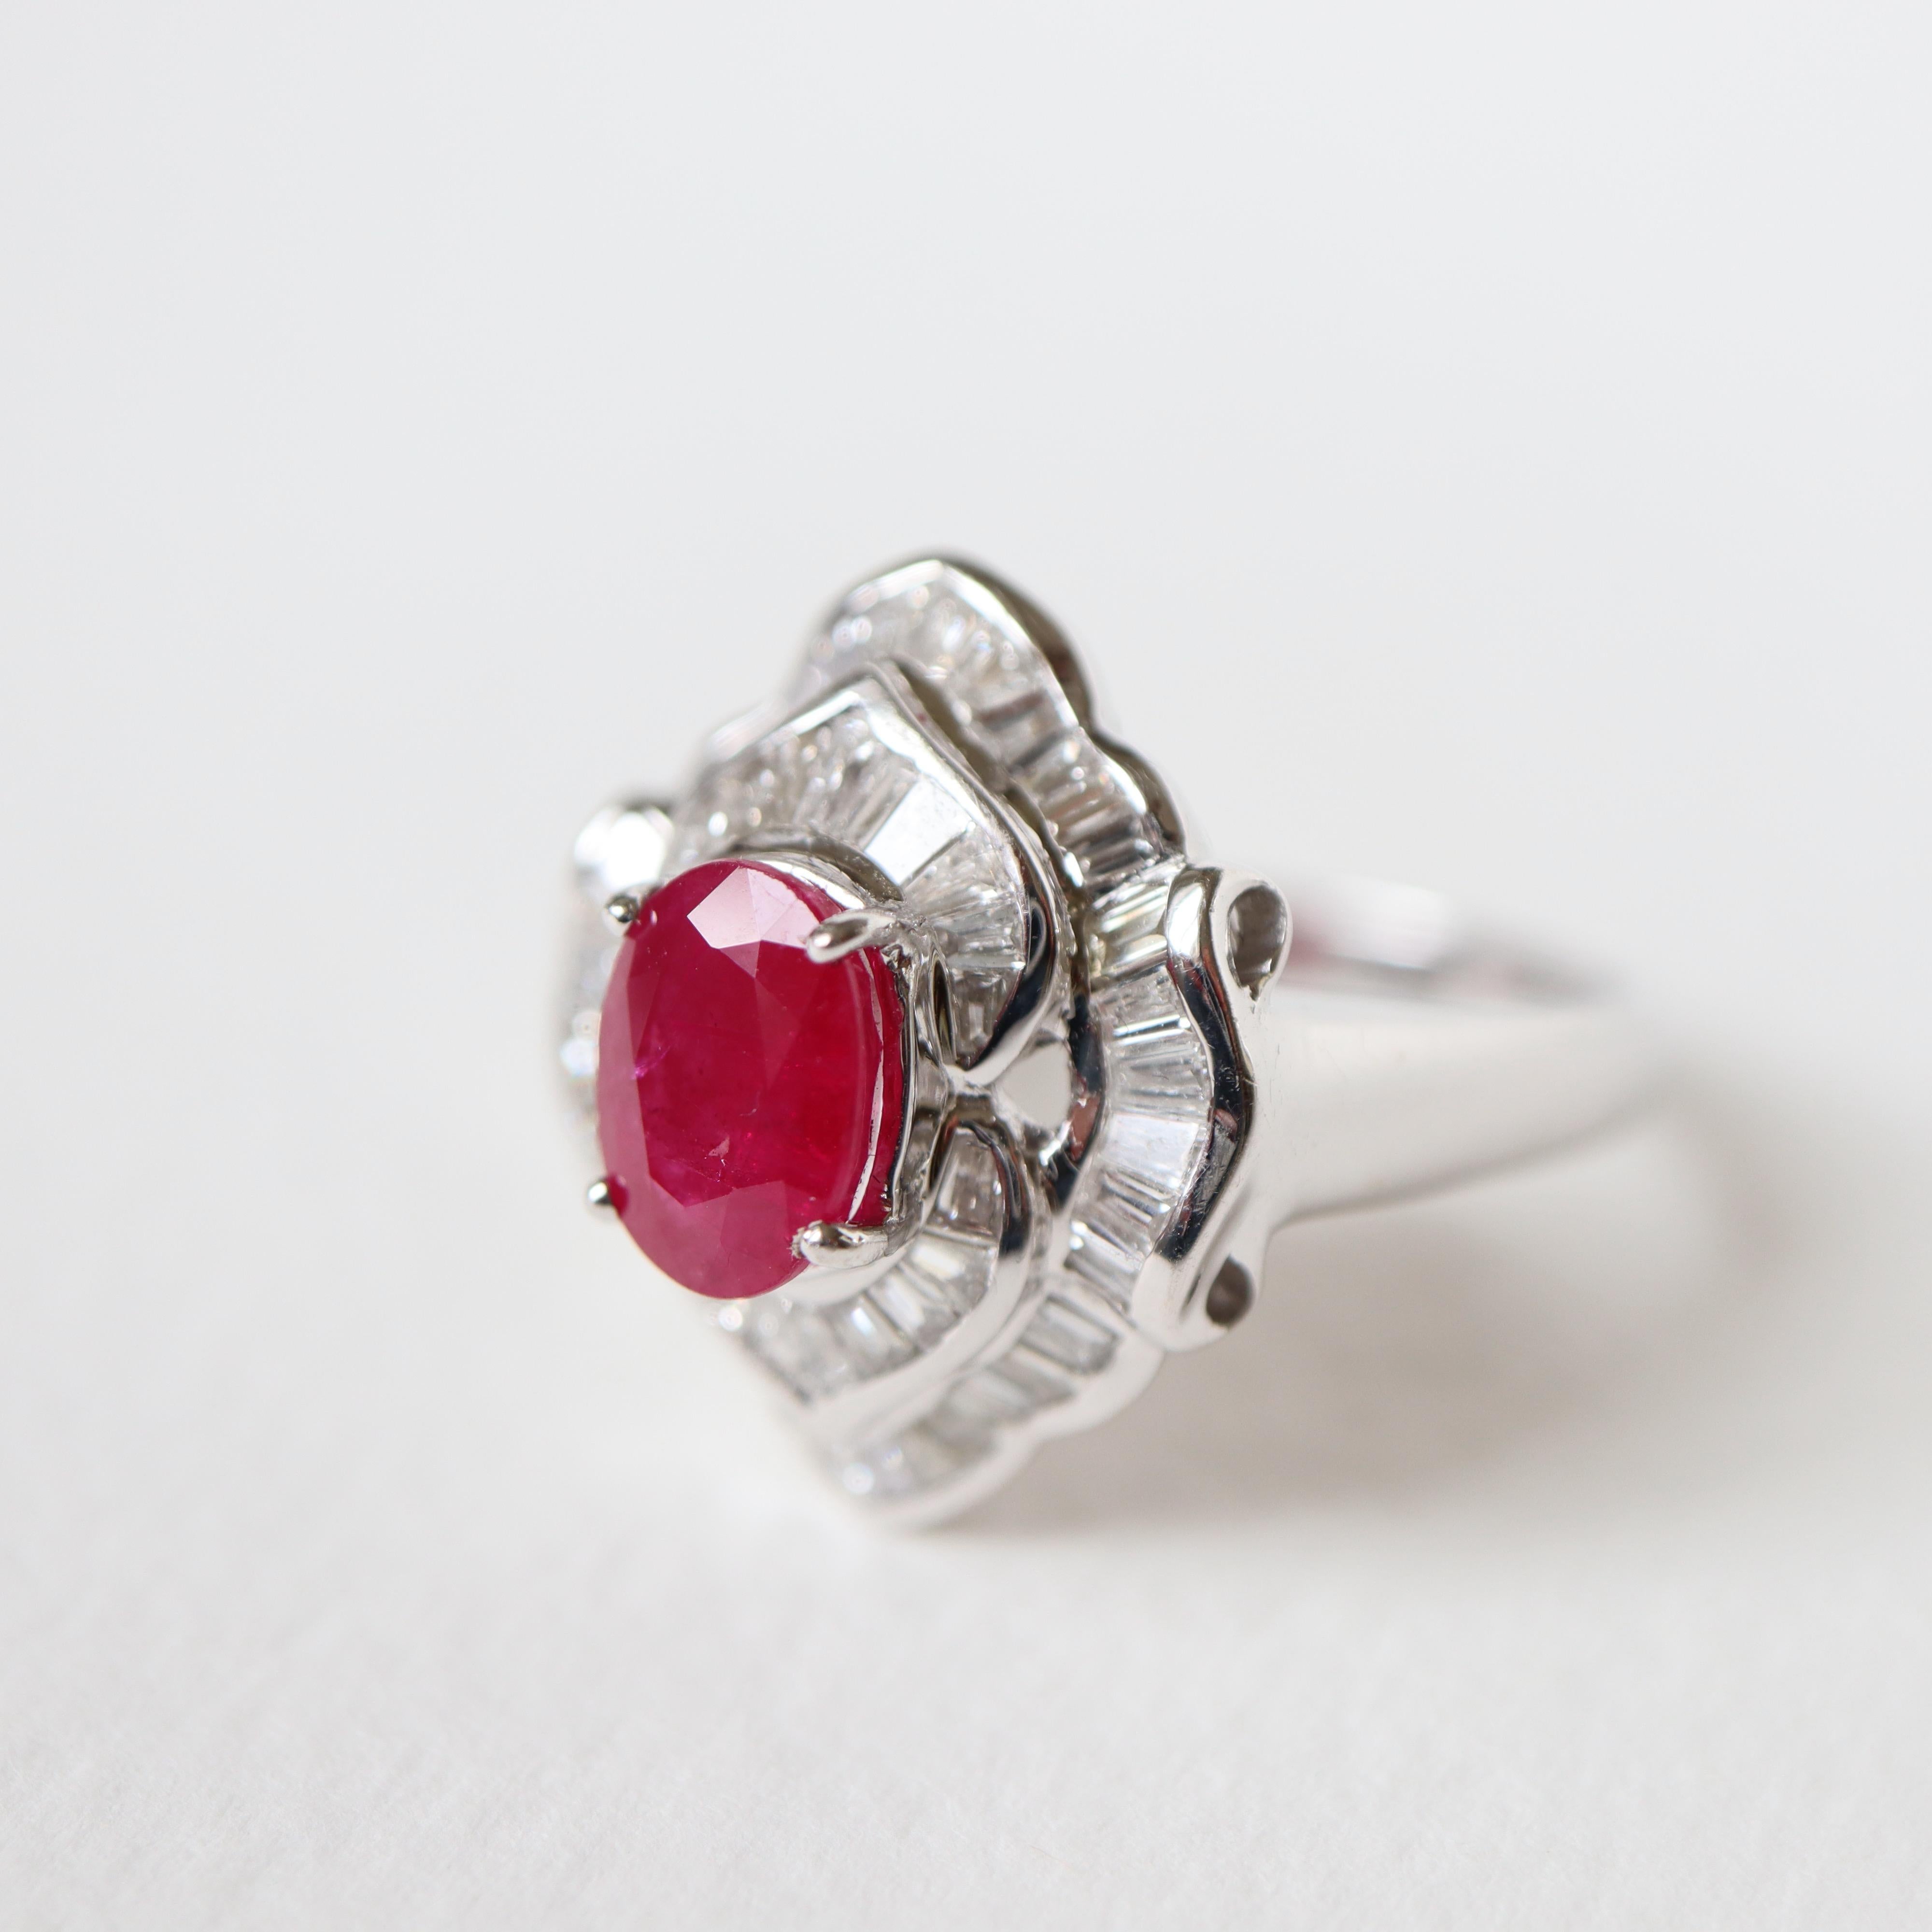 1.98 carat ruby ​​ring and diamonds in 18 carat white gold in a petticoat shape.
Ruby ring in 18K white gold and diamonds holding a 1.98 carat ruby ​​in its center surrounded by Baguette and Taper cut diamonds for a total weight of 1.28